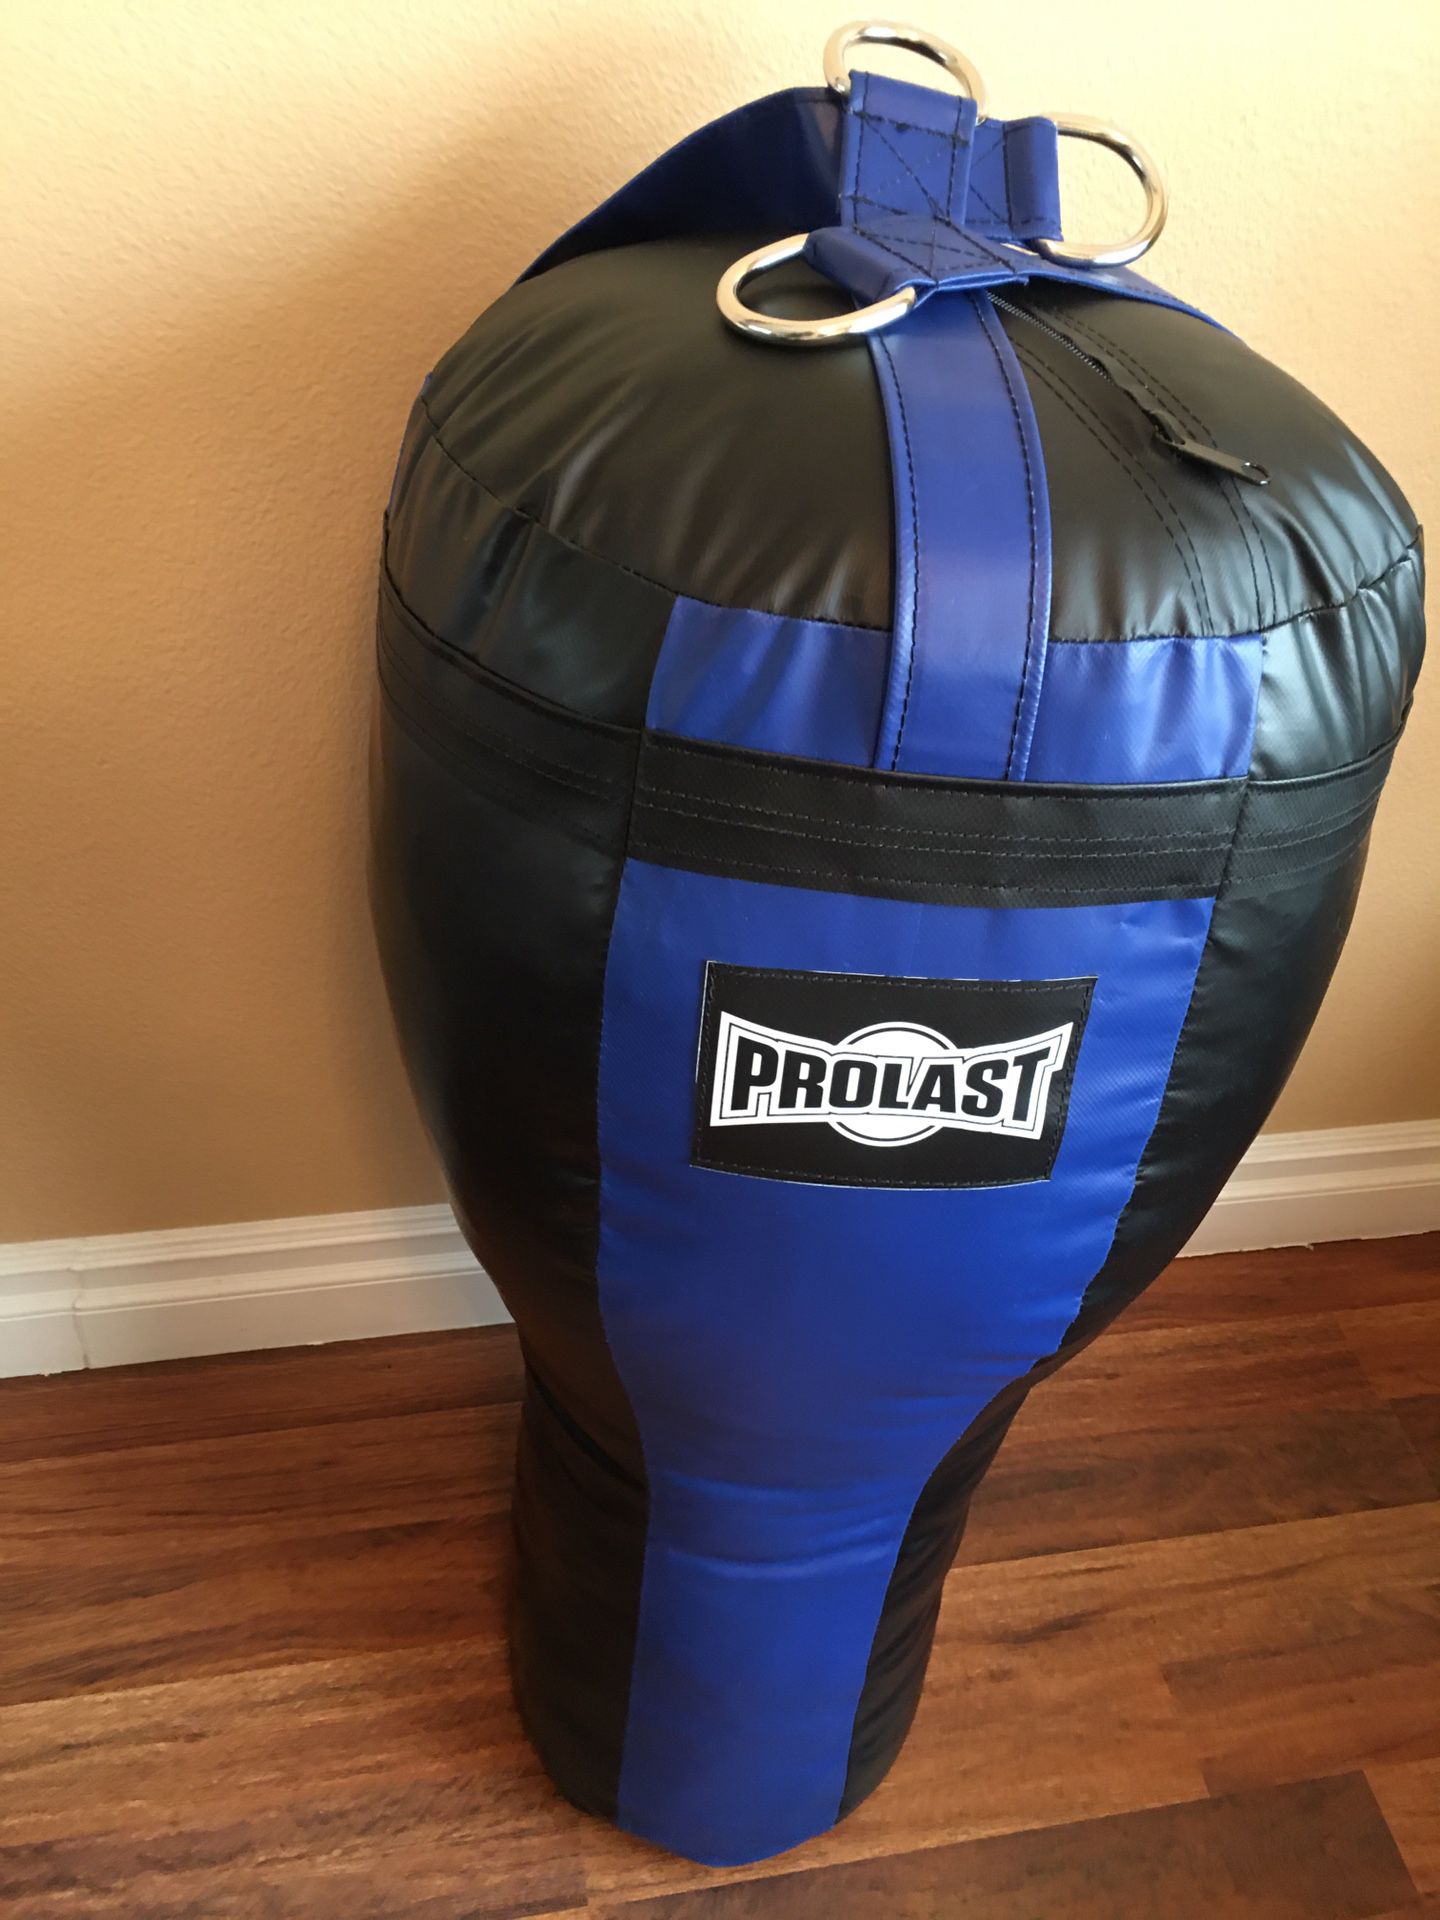 PUNCHING BAG BRAND NEW ANGLE PROFESSIONAL MMA 100 POUNDS FILLED LUXURY MADE USA 🇺🇸 